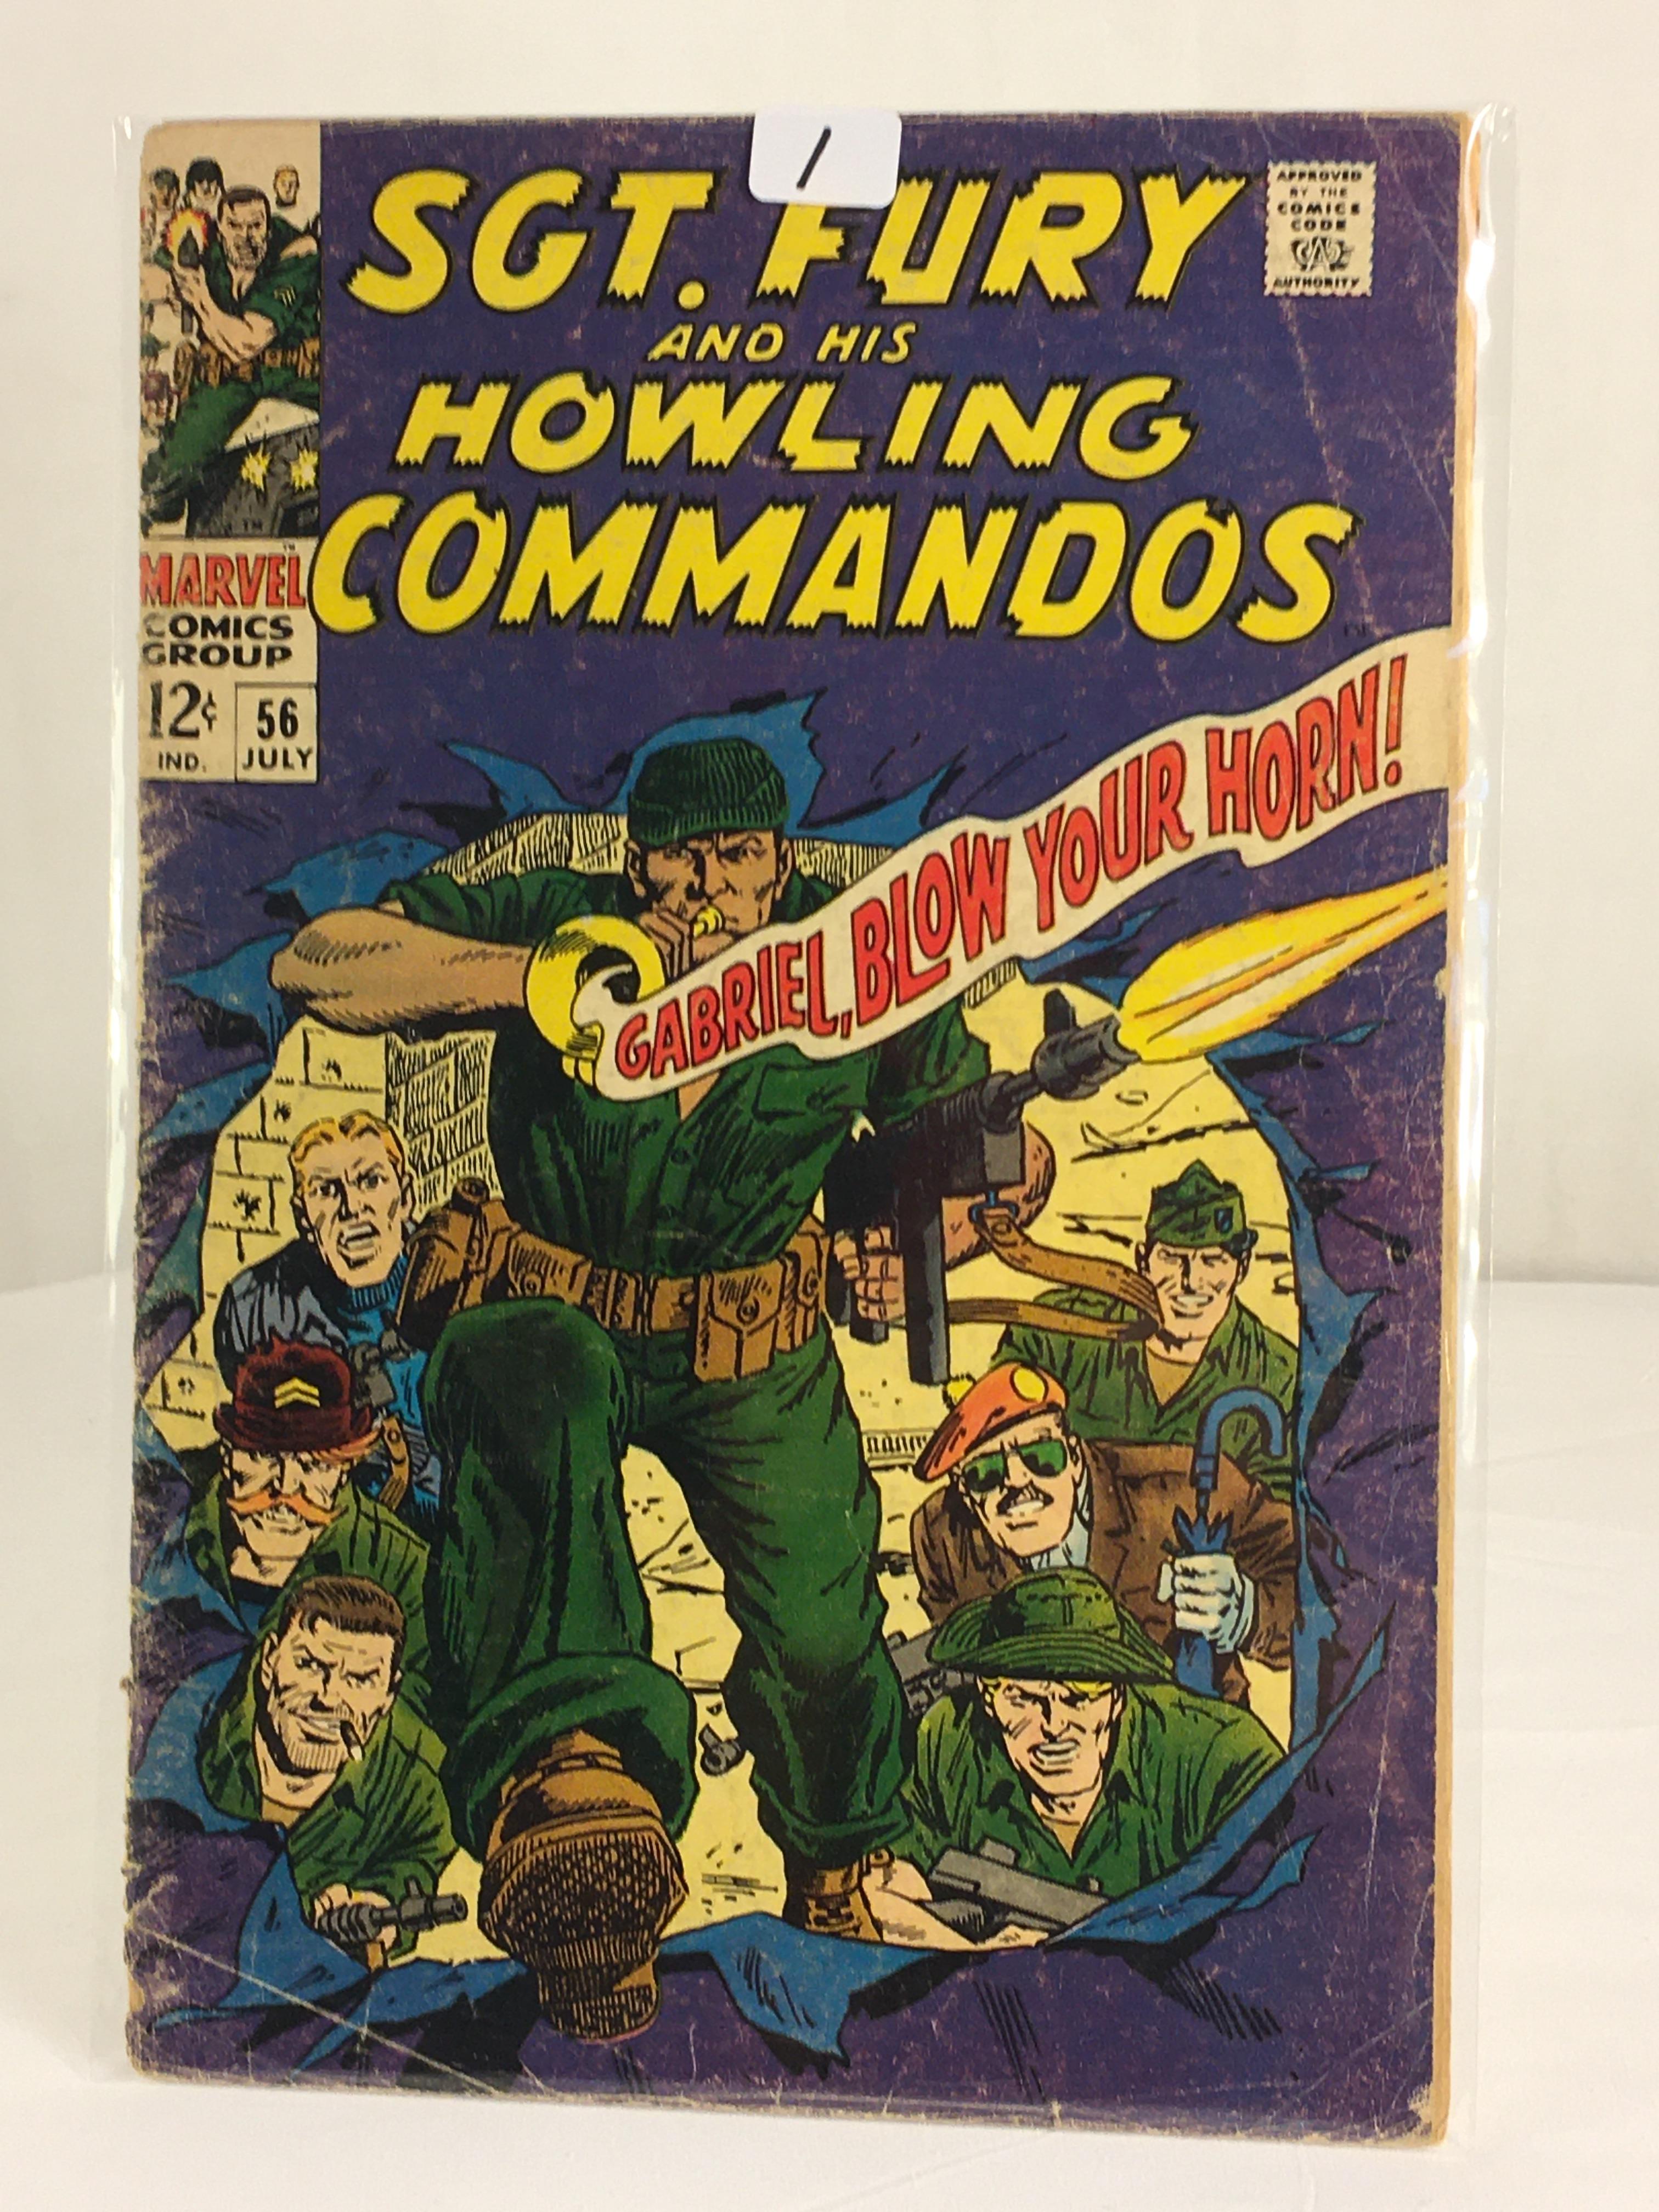 Collector Vintage Marvel Comics SGT. FURY and His Howling Commandos Comic Book #56